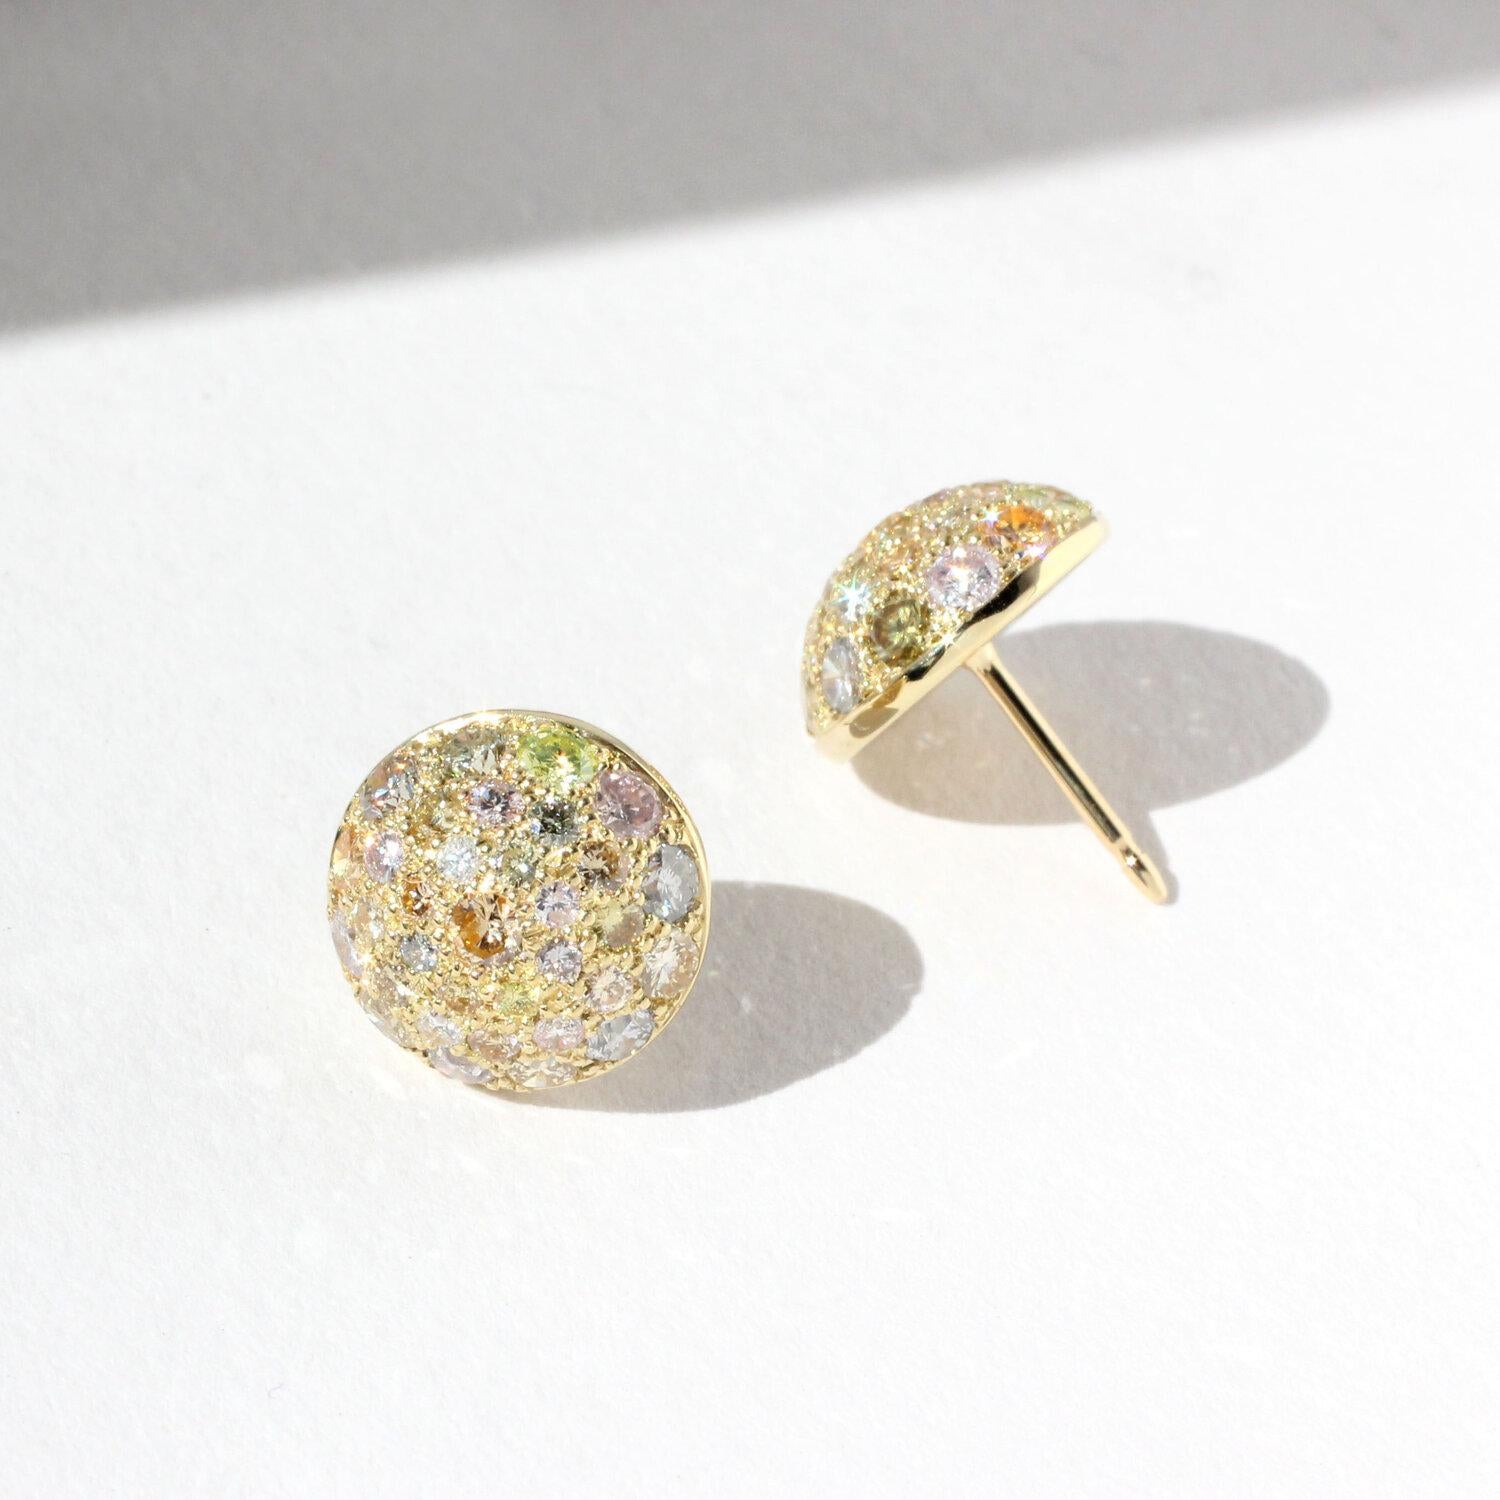 Containing 66 Natural MultiColor Diamonds (2.24 Cts.) in a range of Champagne colors.  Sparkling and lovely, day or night.  Post and butterfly backs.

Made in New York.